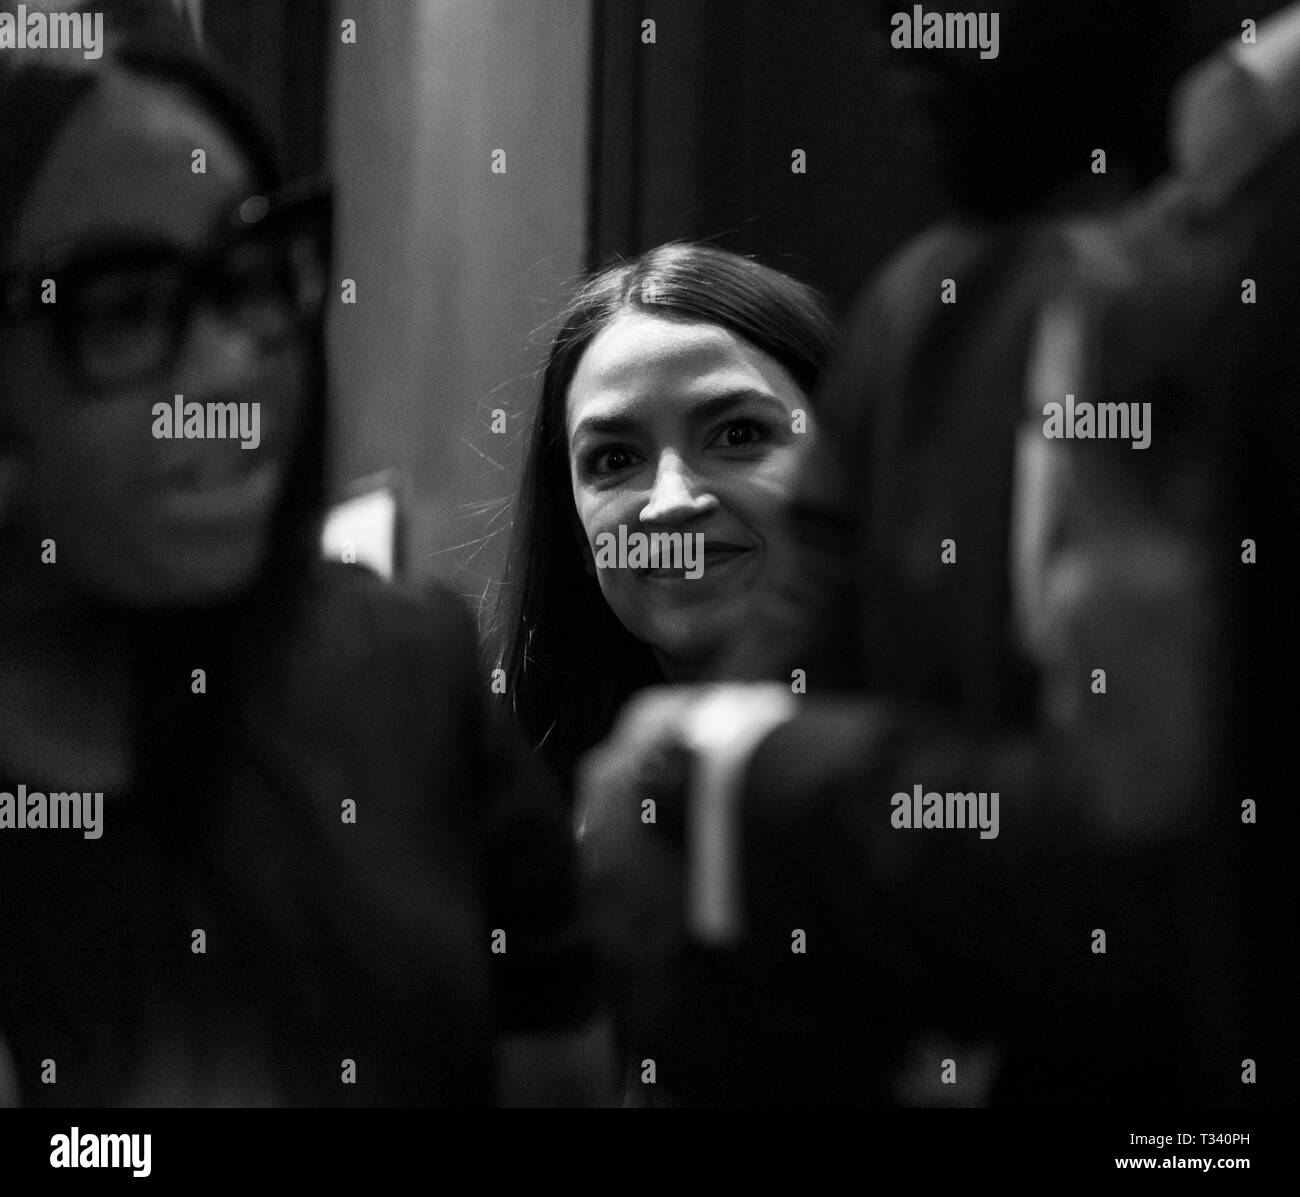 New York, NY - April 5, 2019: US Congresswoman Alexandria Ocasio-Cortez attends National Action Network 2019 convention at Sheraton Times Square. Stock Photo